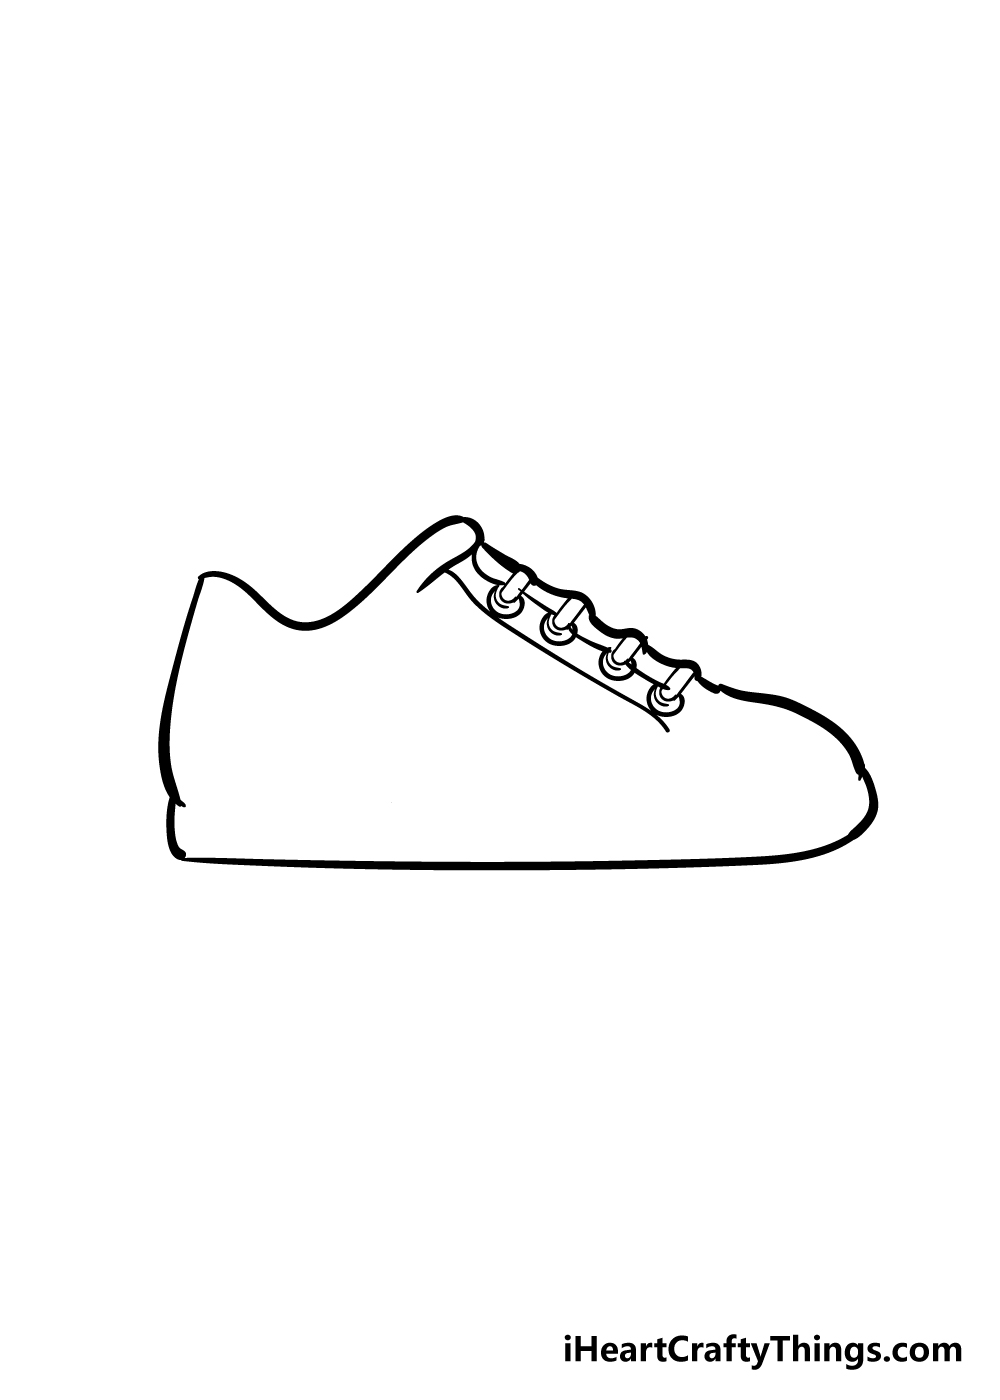 drawing shoe step 3